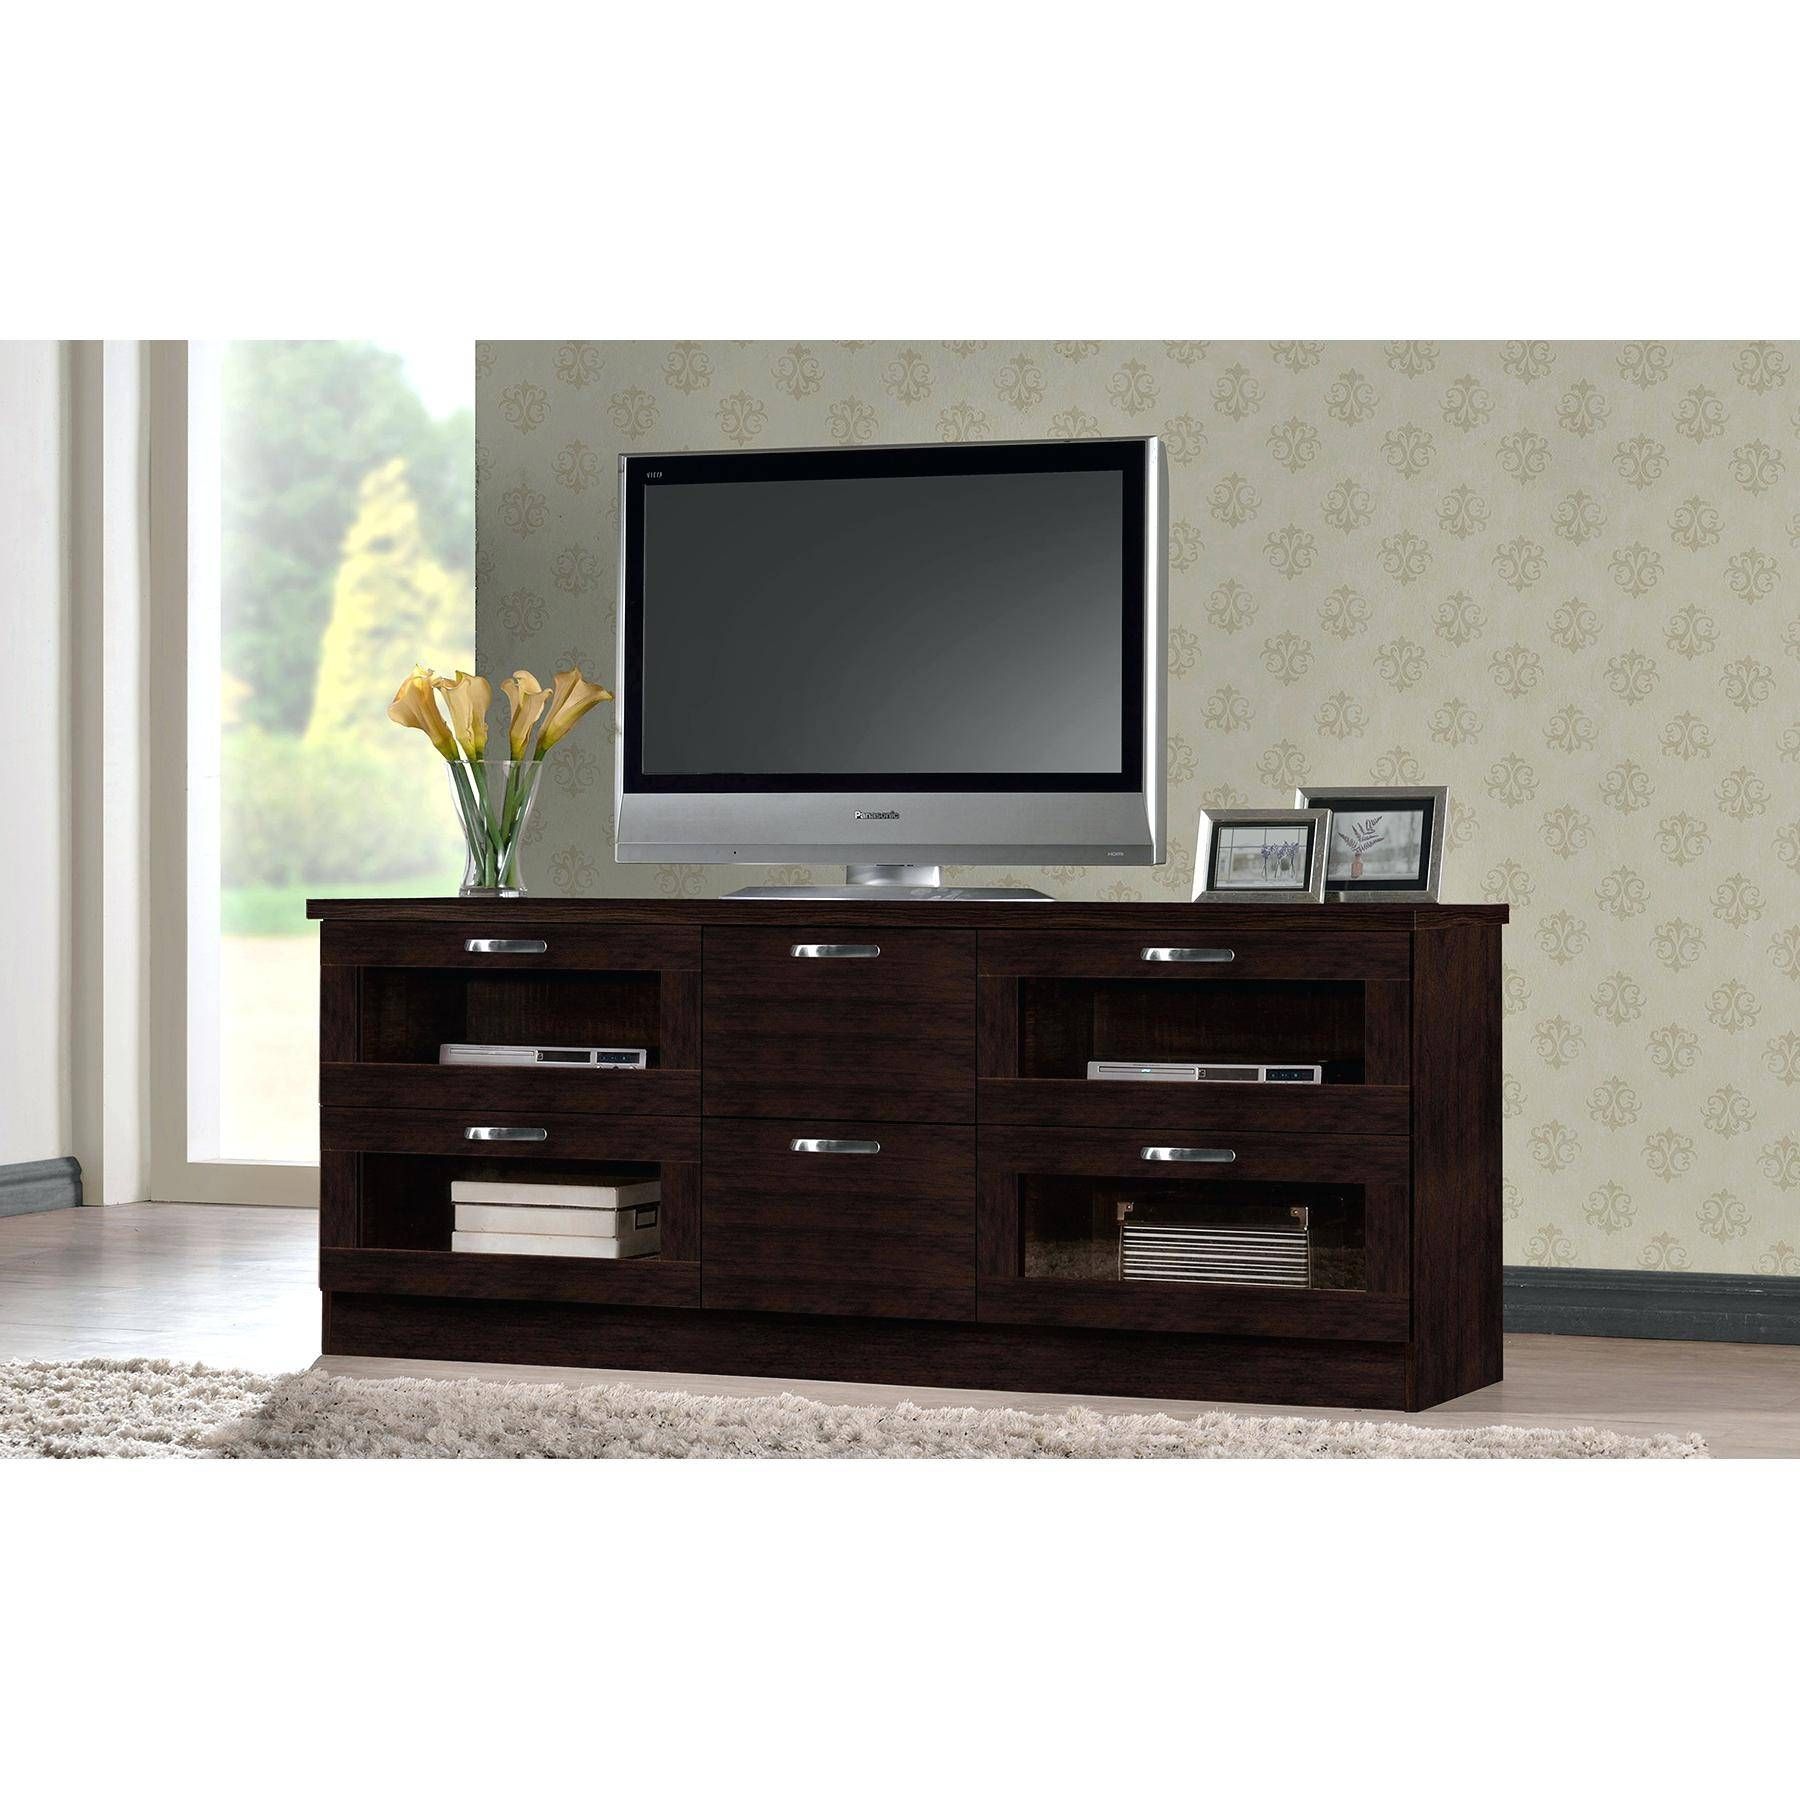 Tv Stand: Charming Dark Wood Tv Stand For Living Space (View 7 of 15)